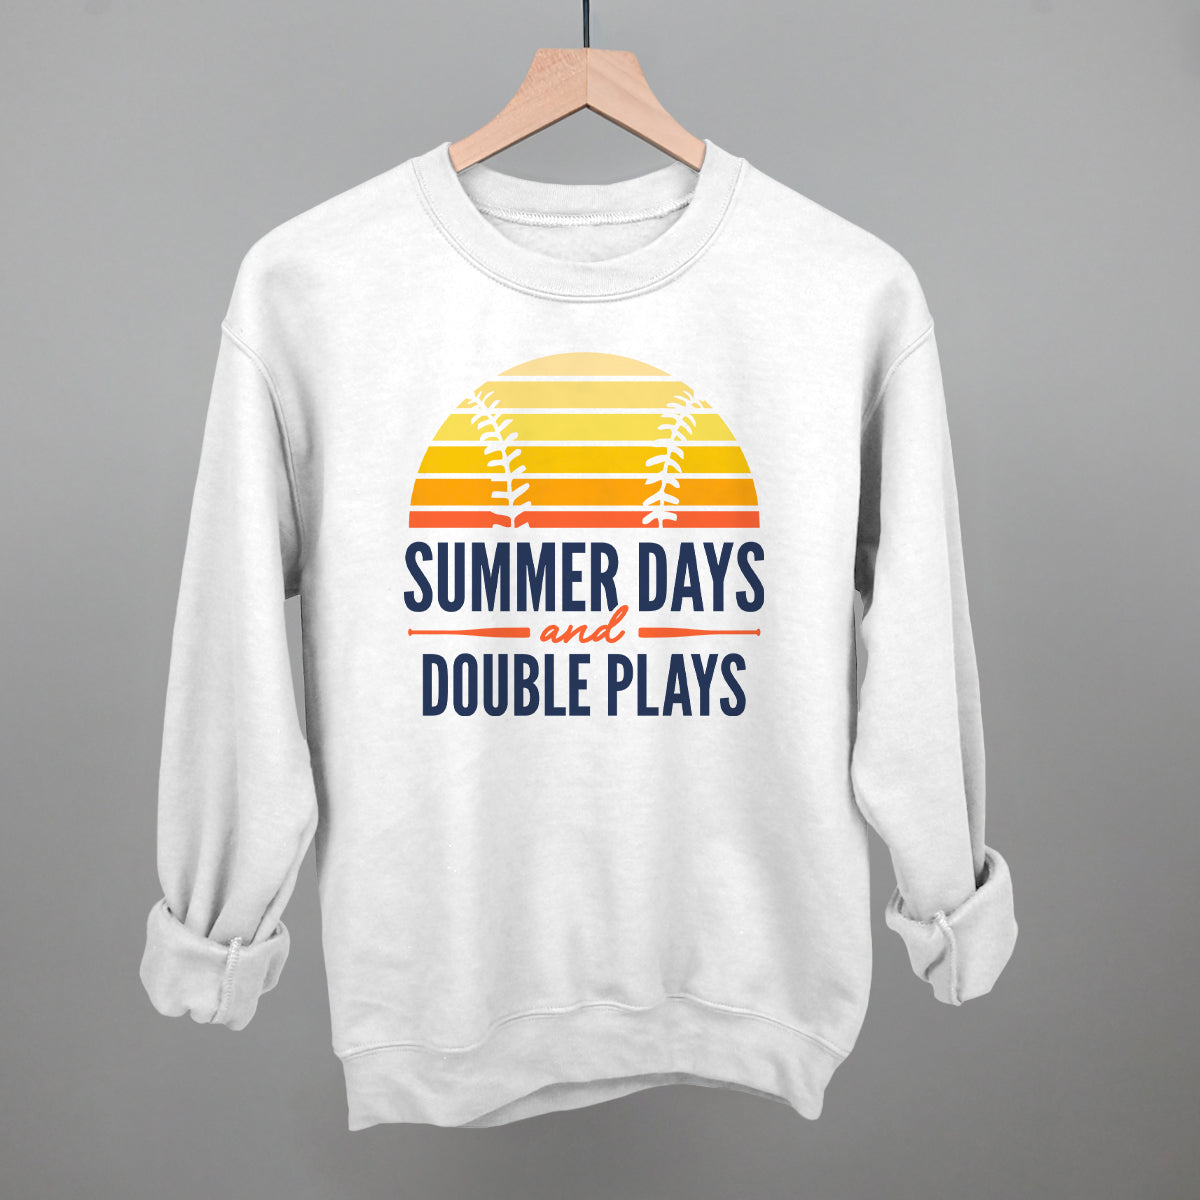 Summer Days And Double Plays (Navy Text)